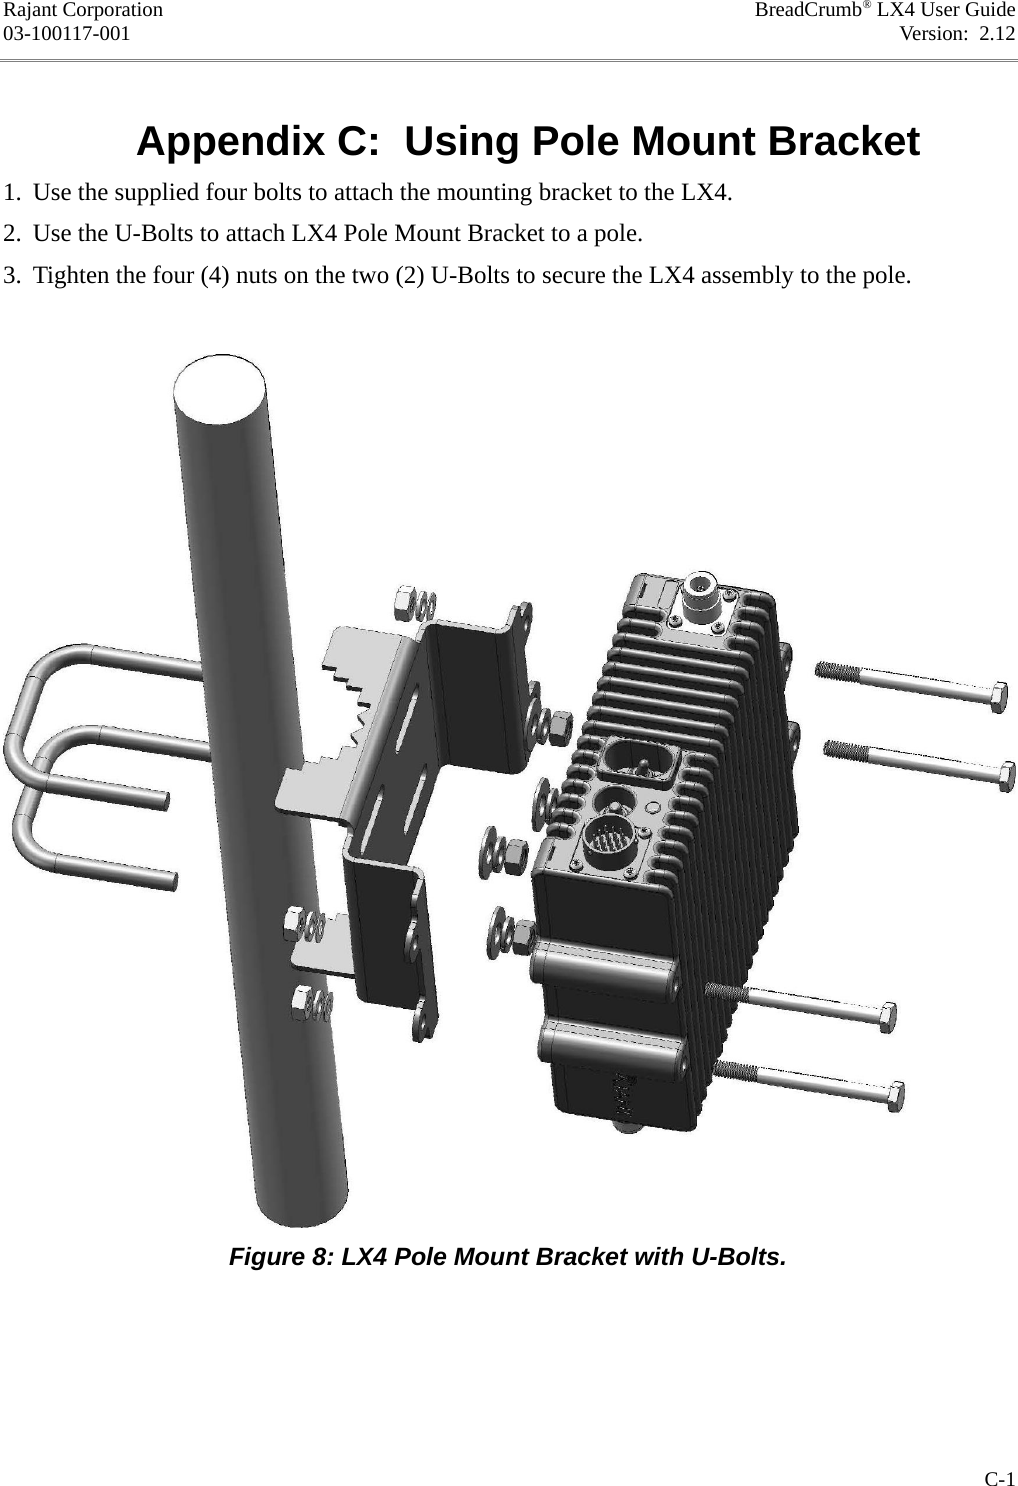 Rajant Corporation BreadCrumb® LX4 User Guide03-100117-001 Version:  2.12Appendix C:  Using Pole Mount Bracket1. Use the supplied four bolts to attach the mounting bracket to the LX4.2. Use the U-Bolts to attach LX4 Pole Mount Bracket to a pole.3. Tighten the four (4) nuts on the two (2) U-Bolts to secure the LX4 assembly to the pole.C-1Figure 8: LX4 Pole Mount Bracket with U-Bolts.